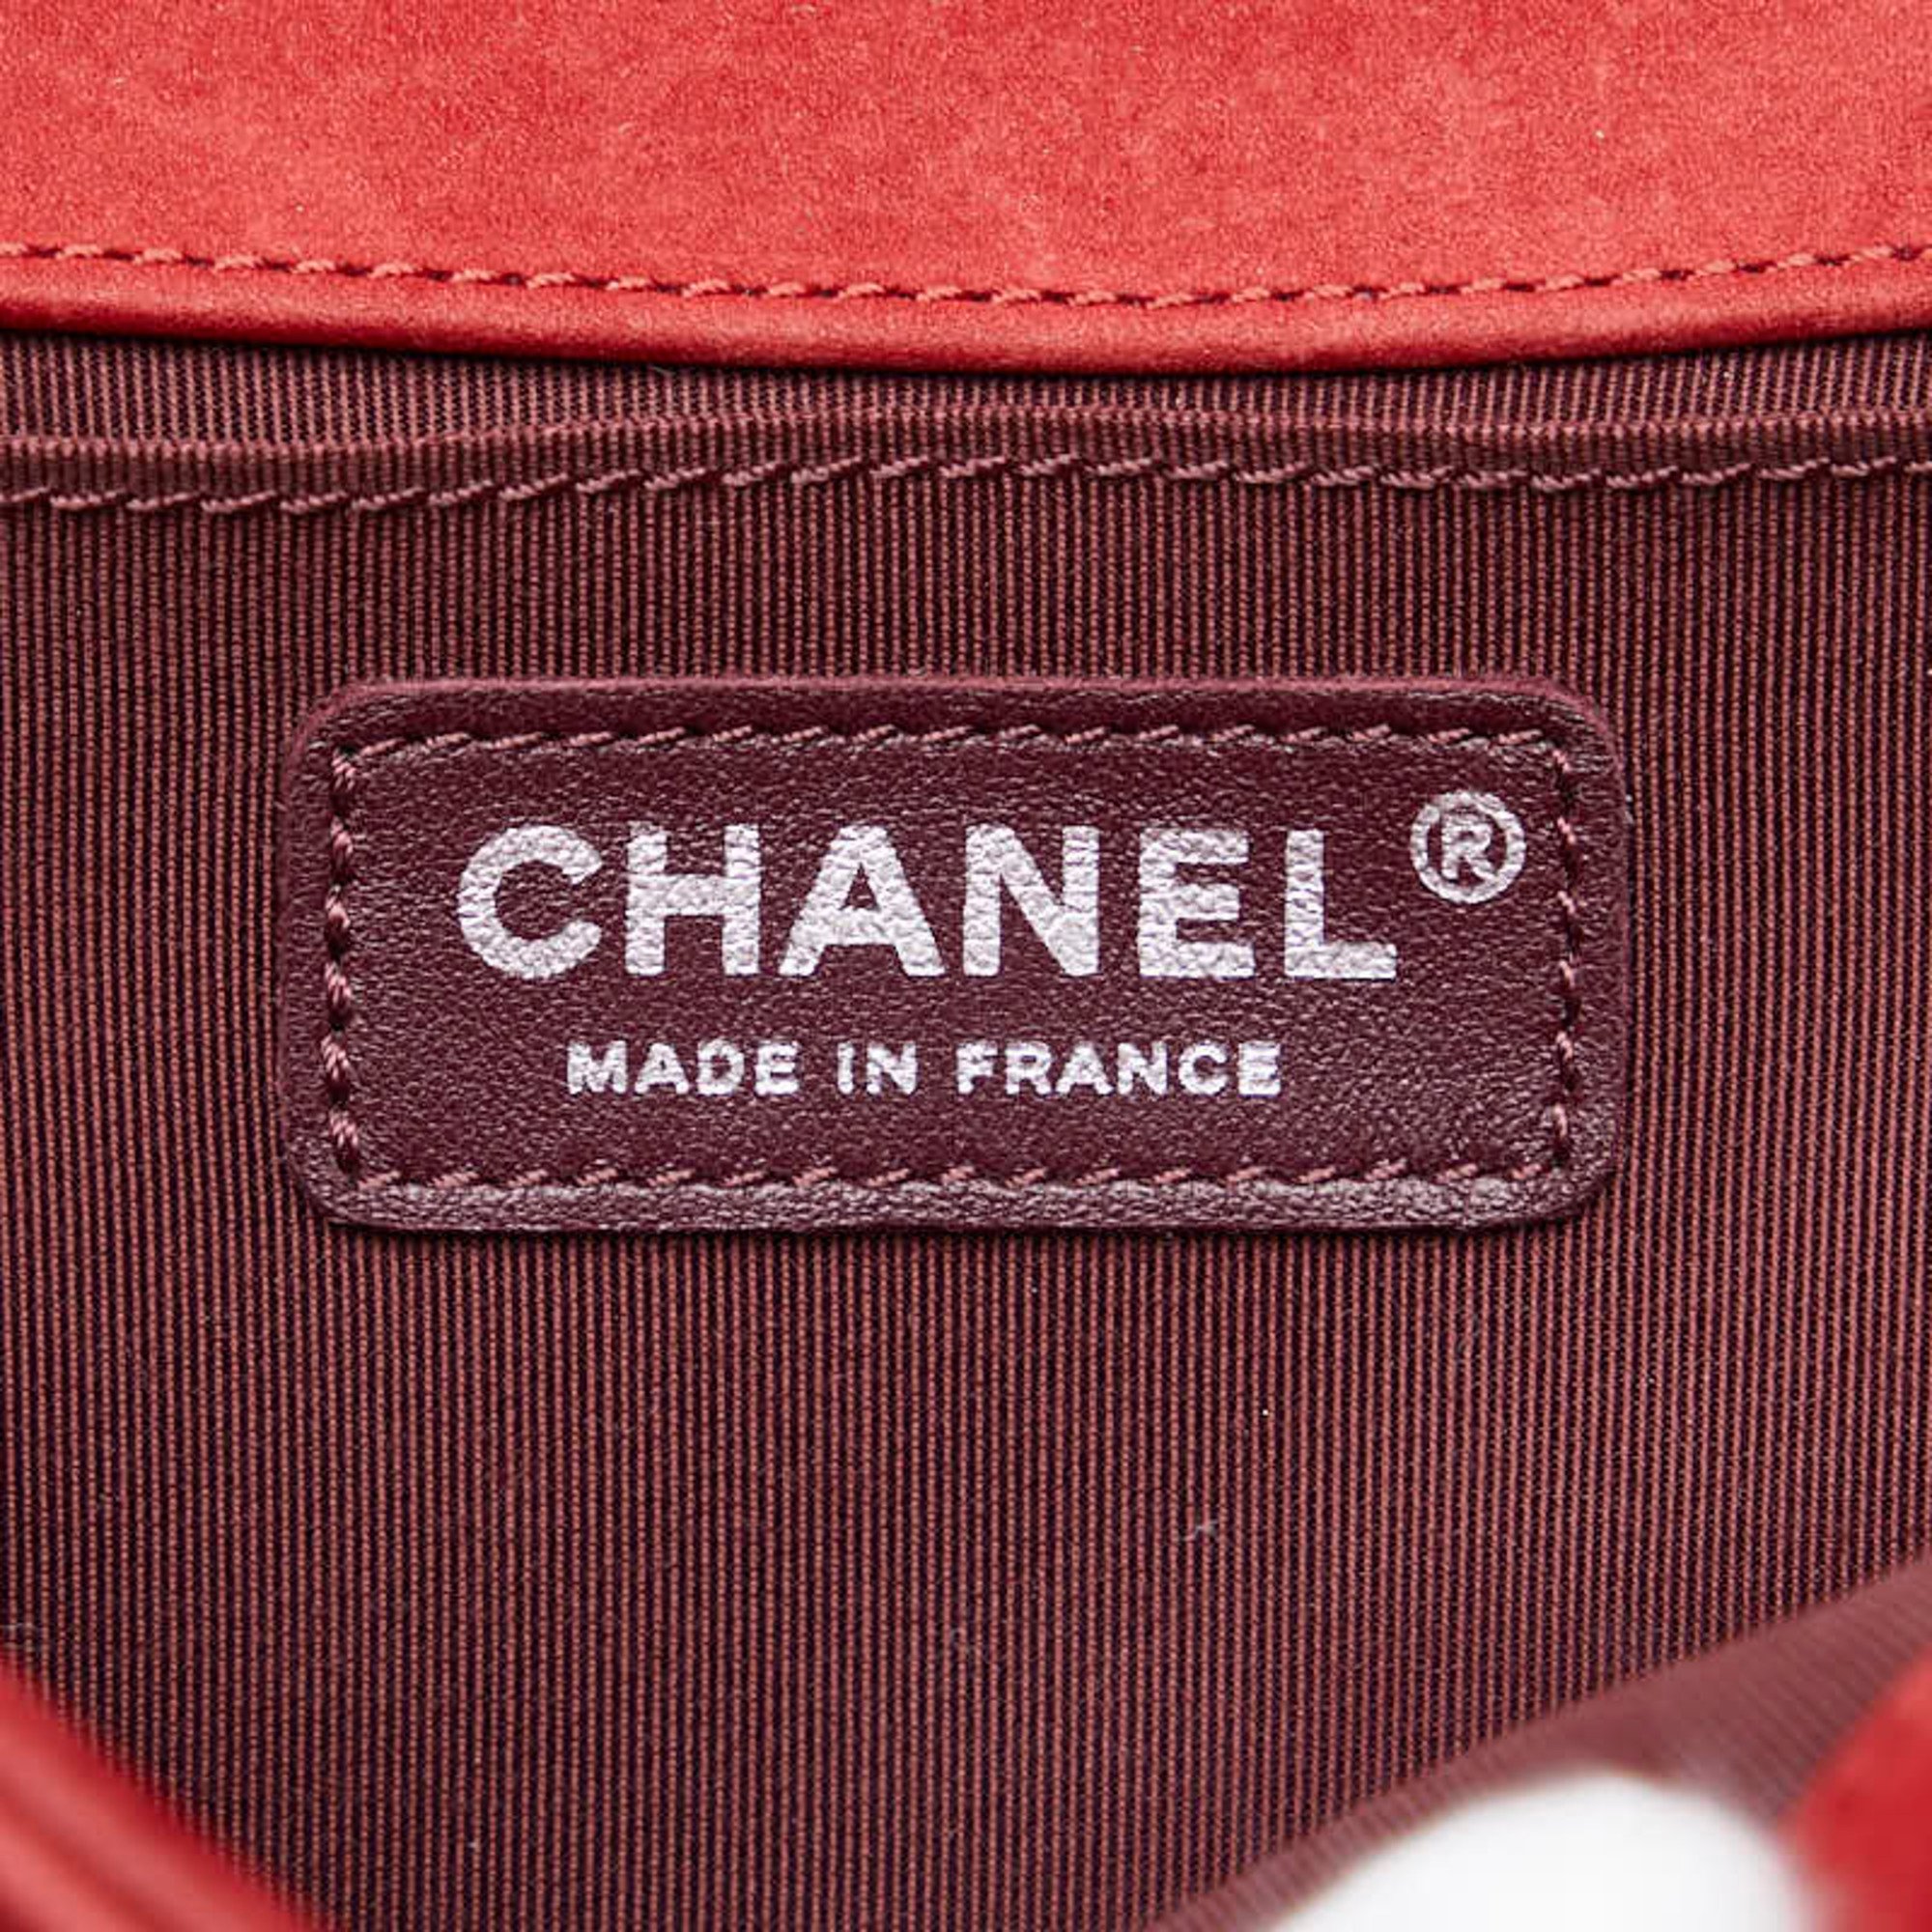 Chanel Boy Coco Mark Chain Shoulder Bag Red Silver Suede Women's CHANEL